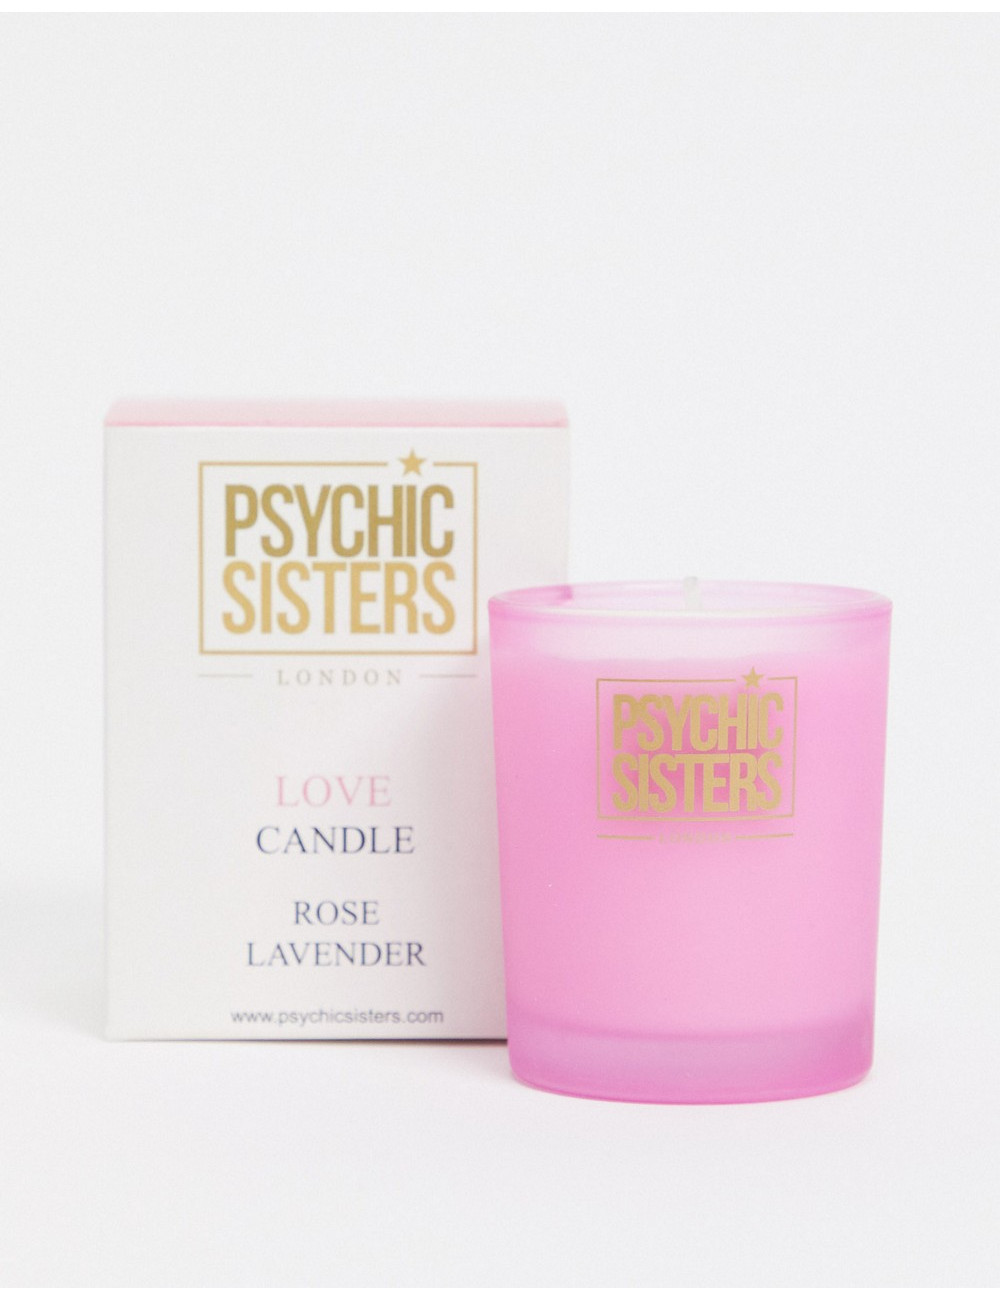 Psychic Sisters rose and...